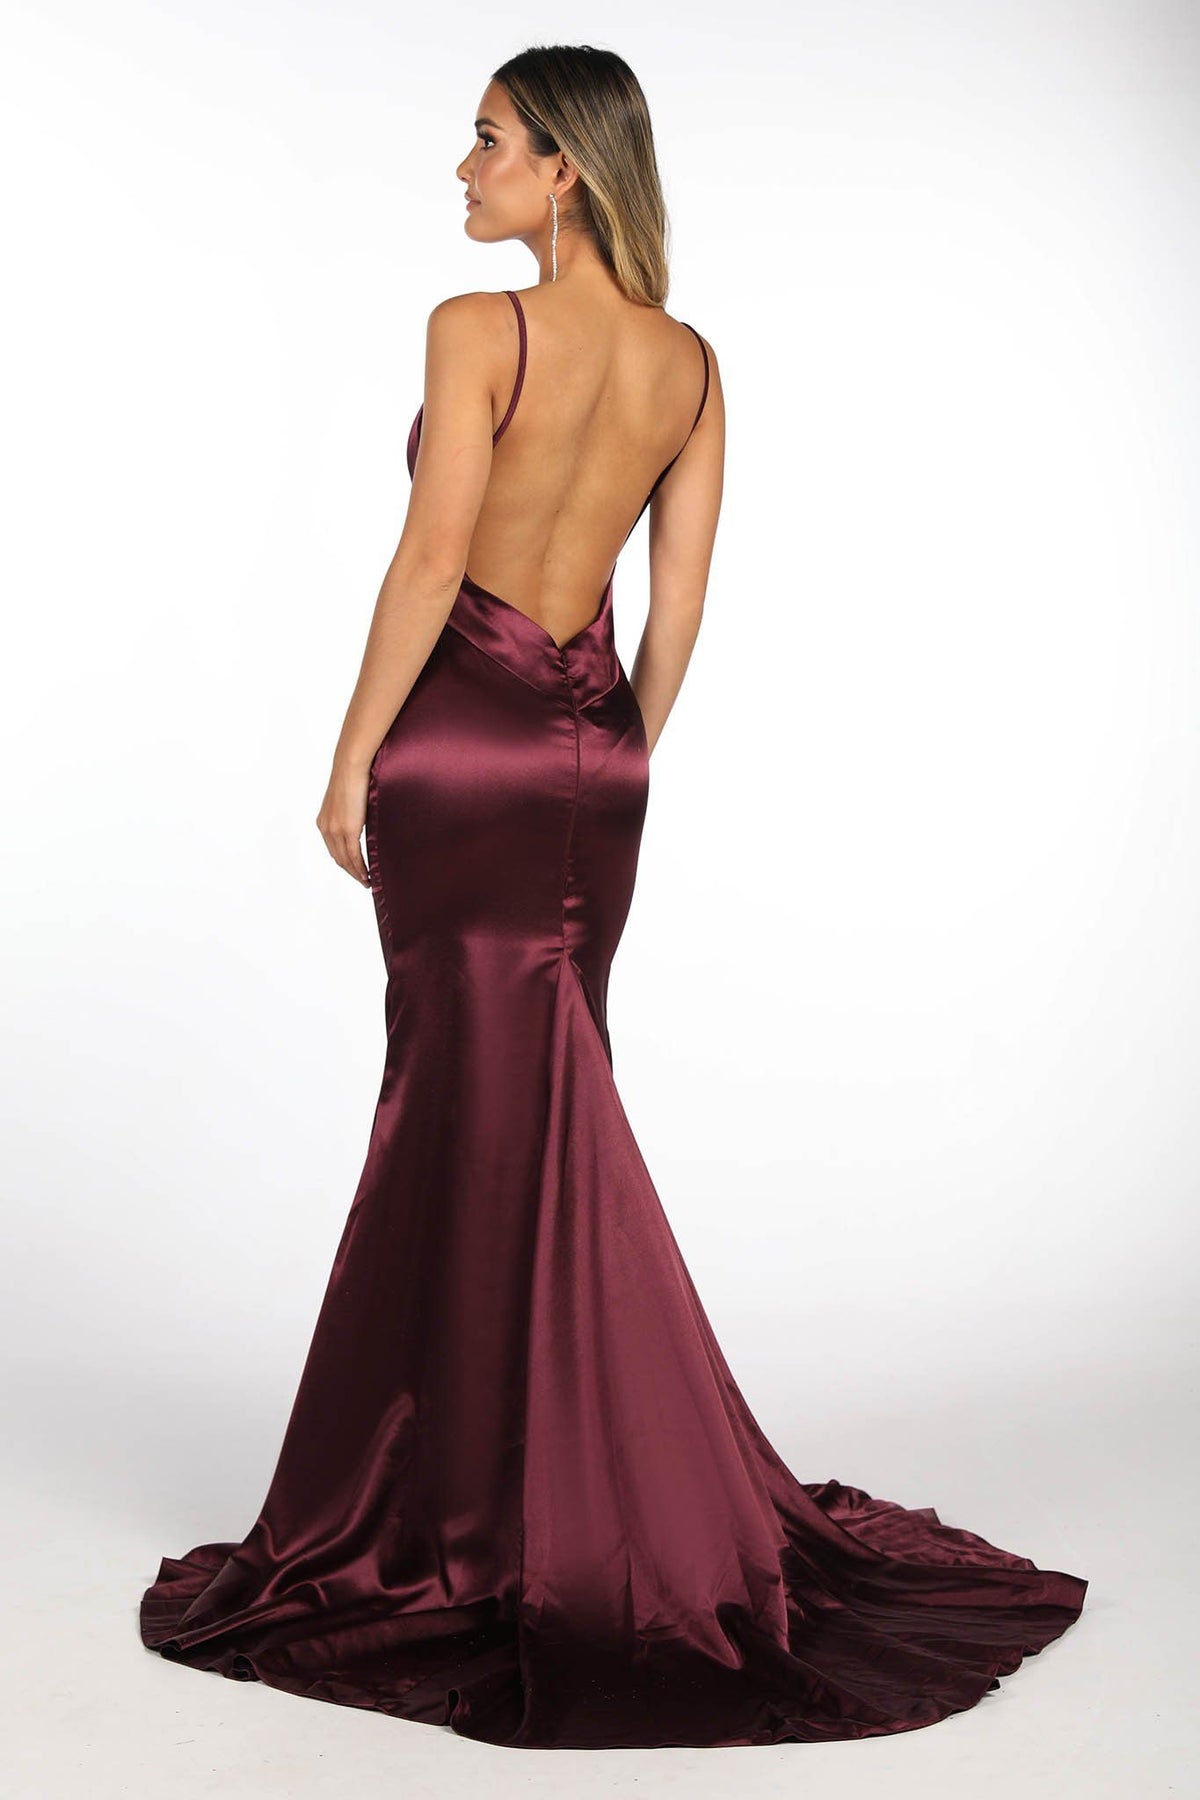 Backless Design with Invisible Back Zip of Deep Purple Satin Full Length Evening Long Dress with Deep V Neckline, Thin Shoulder Straps, Open V Backless Style and Sweep Train